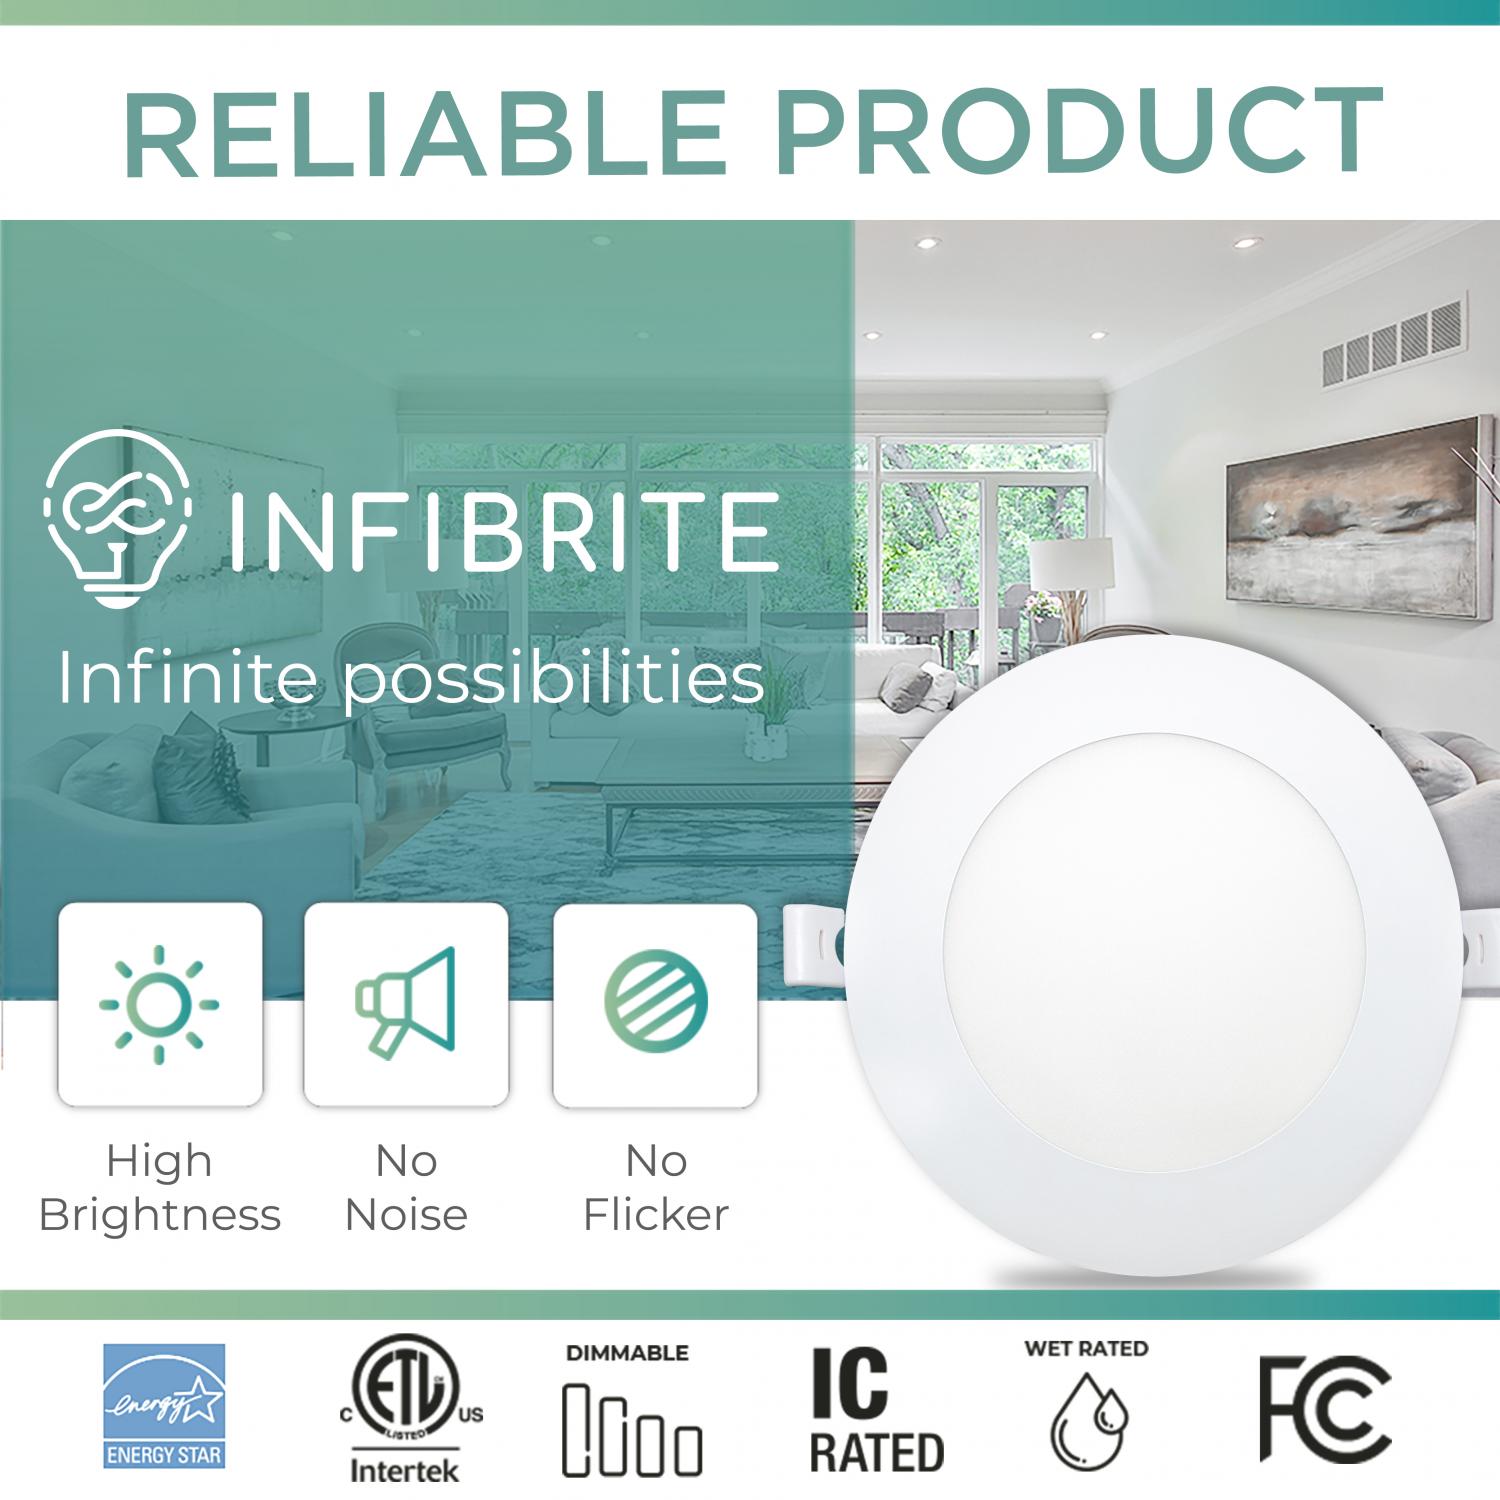 Infibrite 4 Inch 2700K/3000K/3500K/4000K/5000K Selectable 9W 750 LM Ultra-Slim LED Ceiling Light with Junction Box, Flush Mount, Dimmable, Fixture for Bedroom, Wet Rated for Bathroom, Easy Install, 75W Eqv, ETL & Energy Star, US Company (24 Pack)